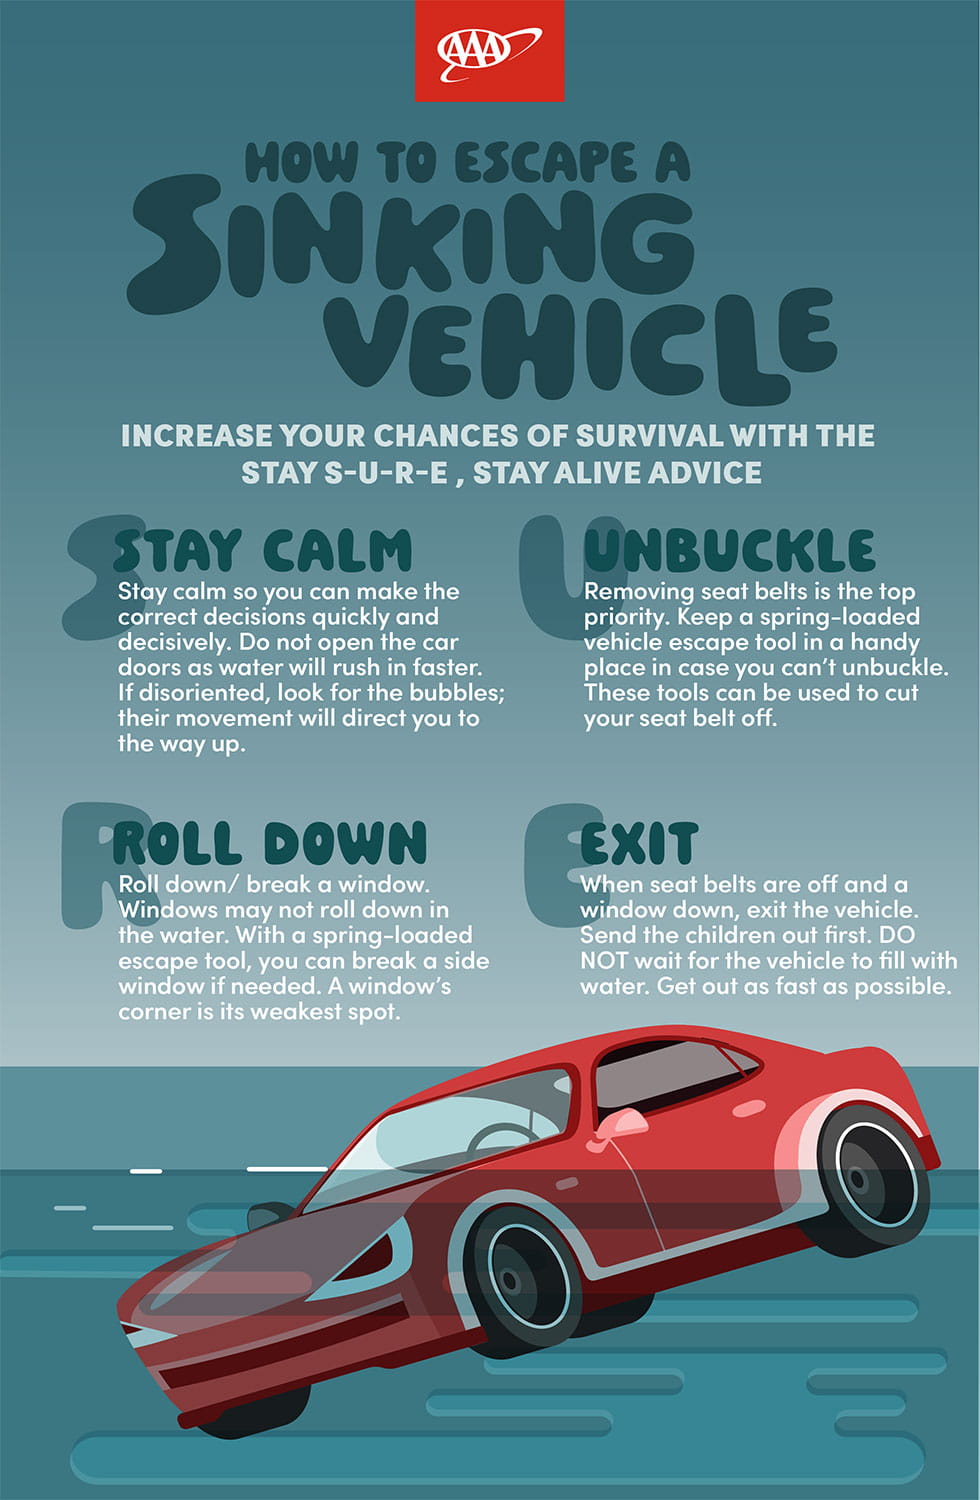 AAA infographic on escaping a sinking vehicle